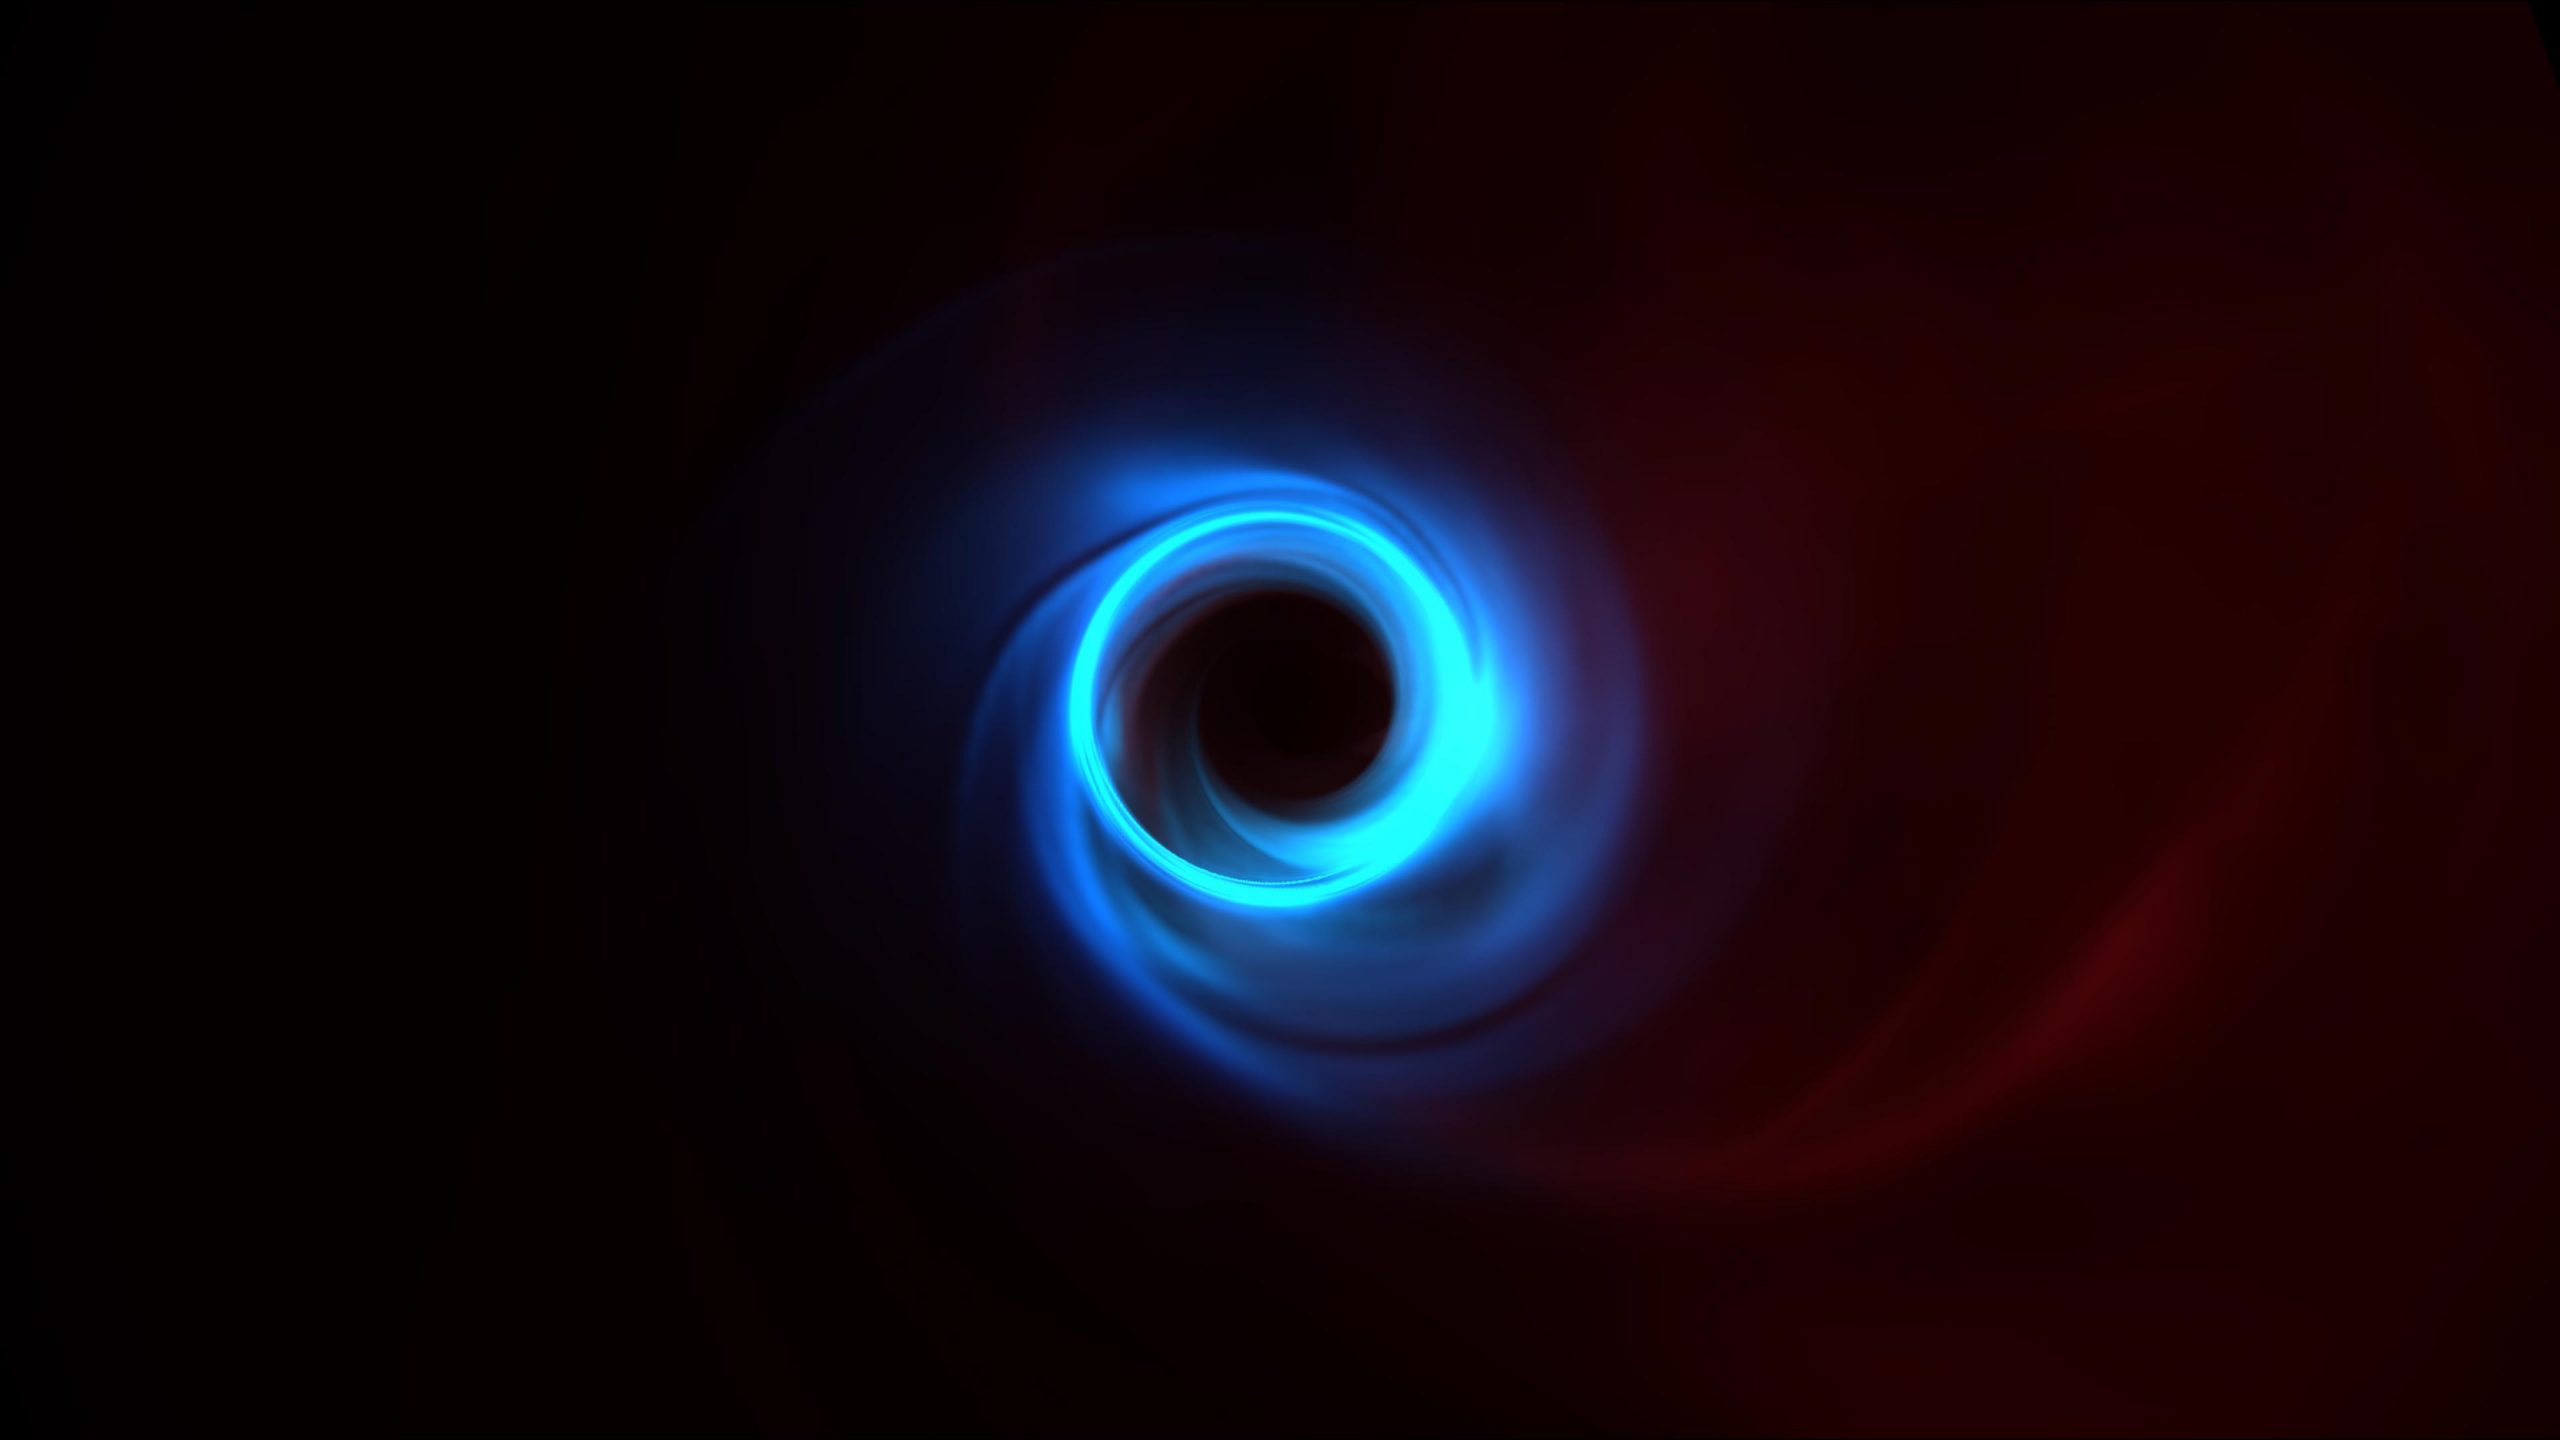 Einstein S Theory Of General Relativity Tested Using Black Hole Shadow